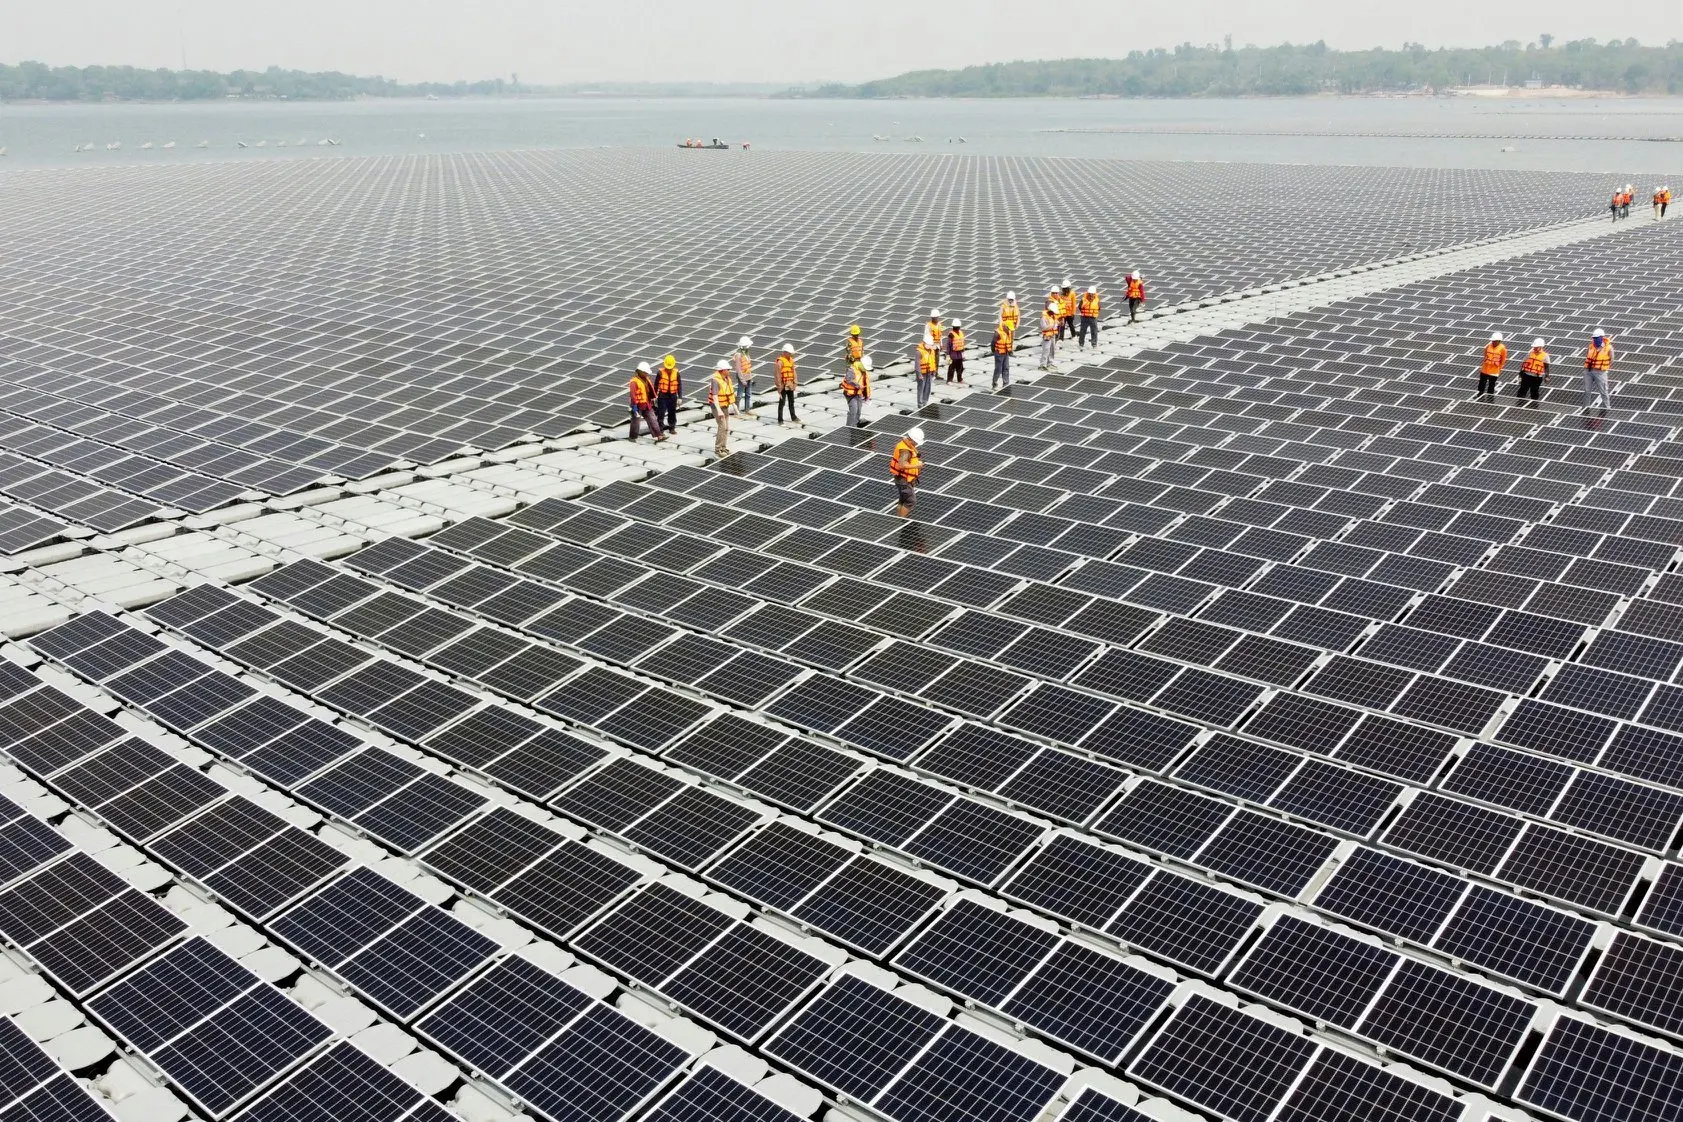 floating solar panels - What are the risks of floating solar panels